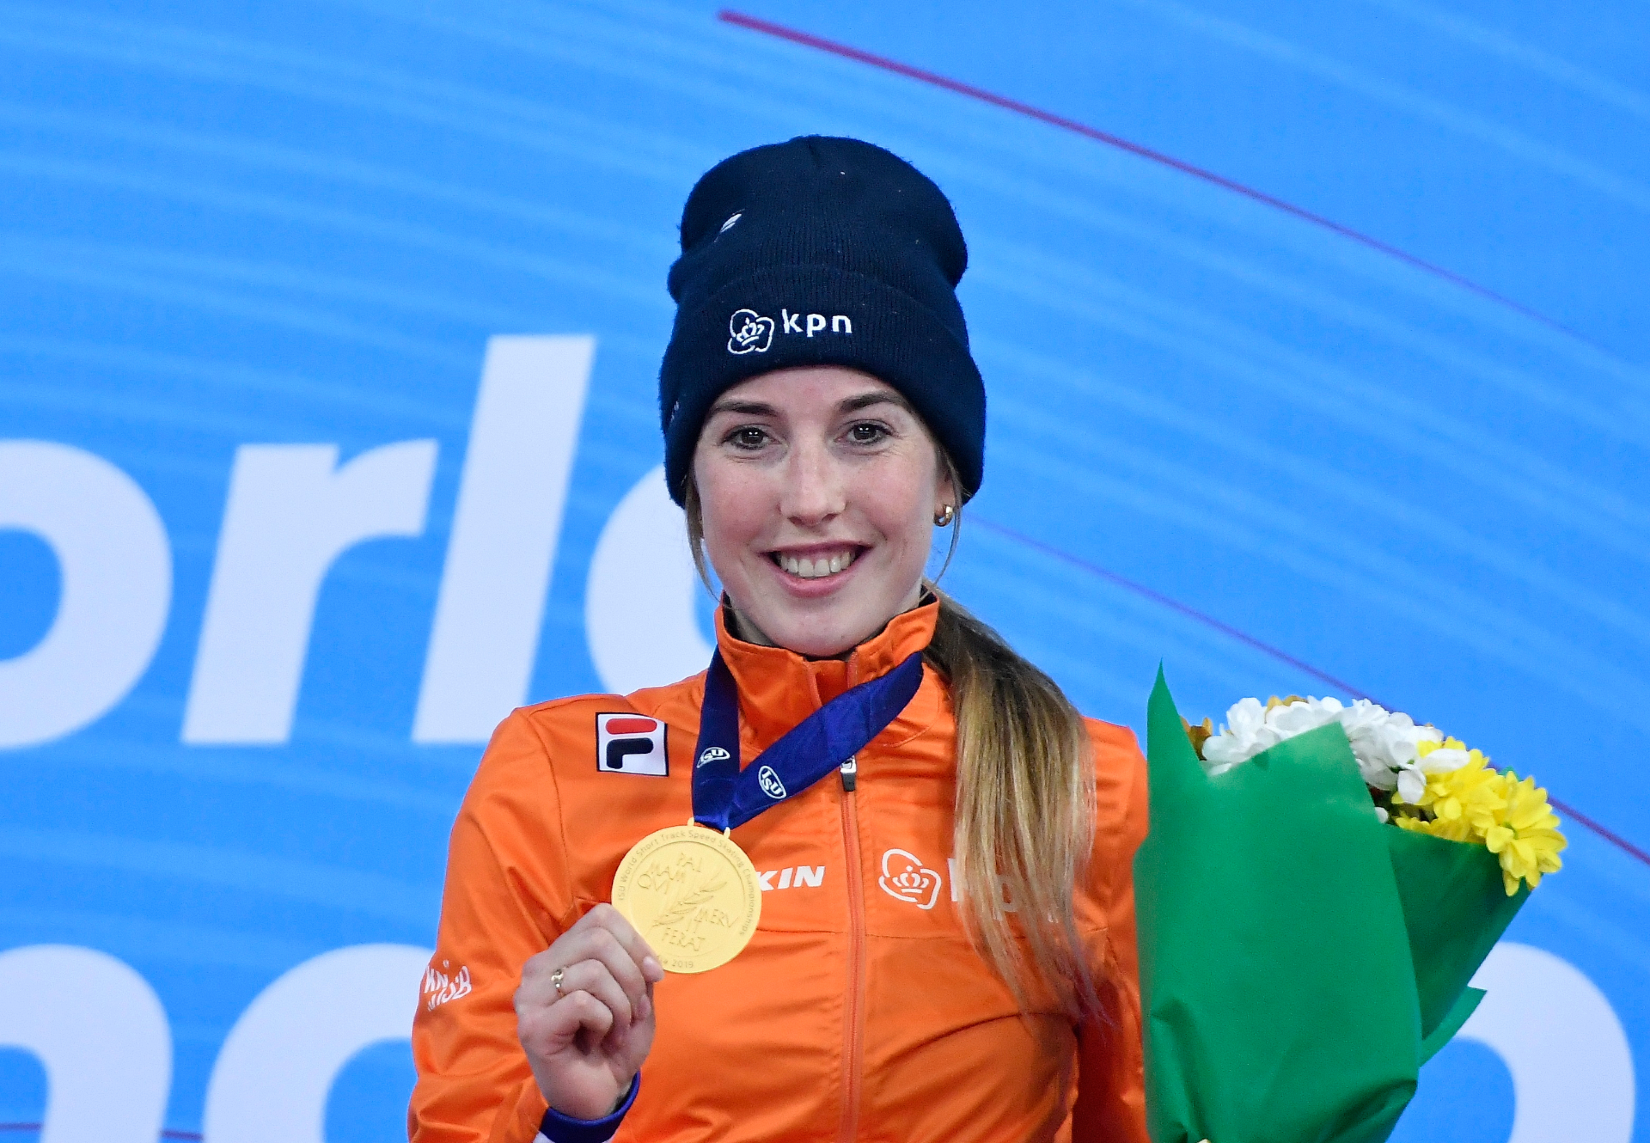 Lara van Ruijven holding her gold medal and a bunch of flowers at the ceremony following her victory at the World Short Track Speed Skating Championships in 2019.